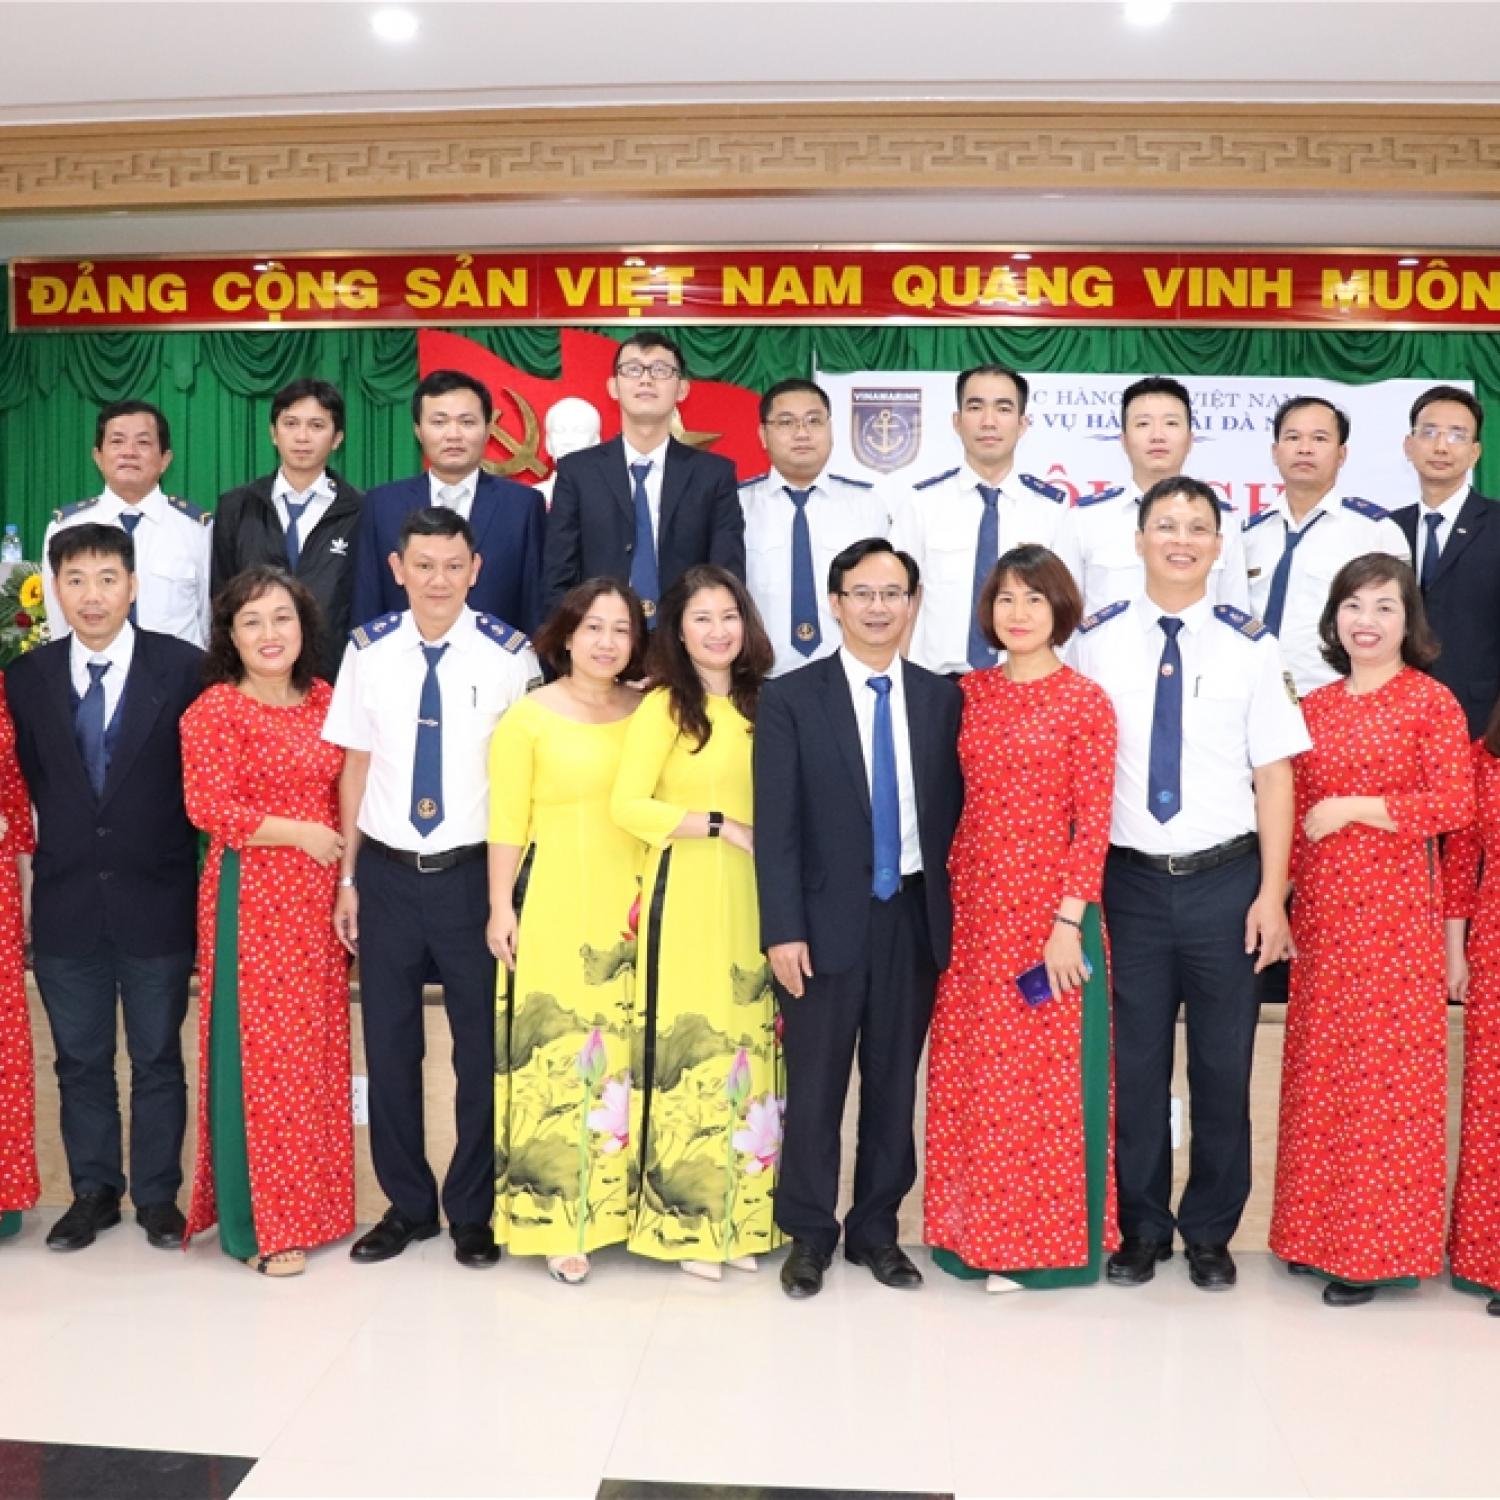  DA NANG PORT SERVICE CONFERENCE ISSUING THE CCVC CONFERENCE IN 2021